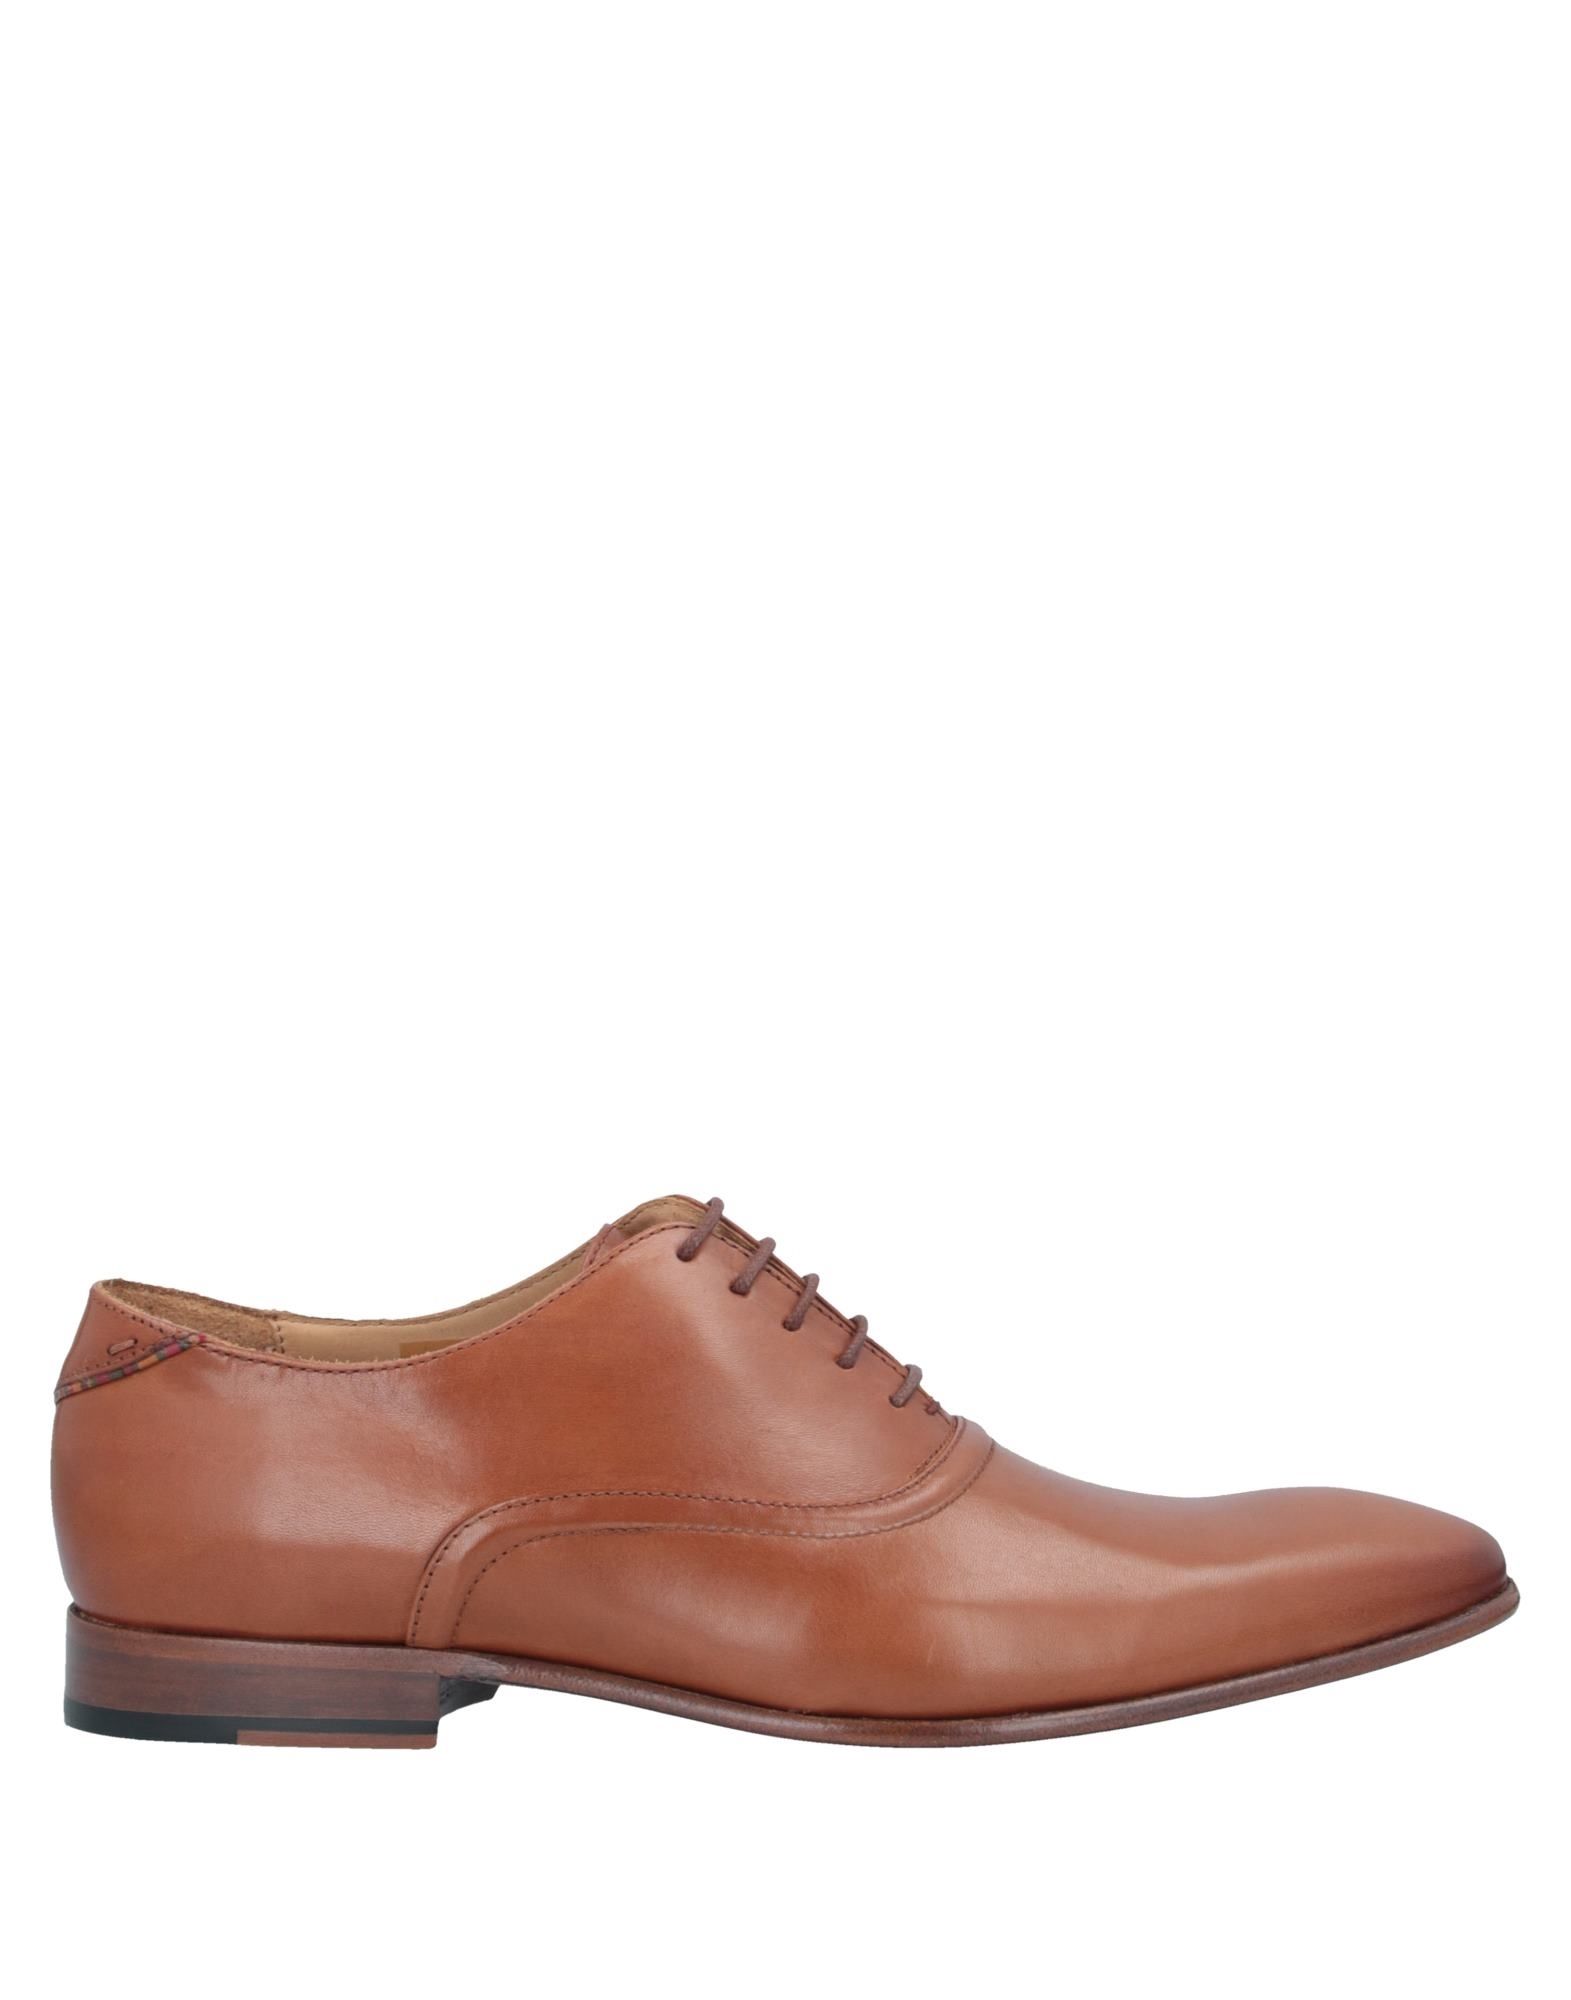 PS PAUL SMITH Lace-up shoes - Item 11876281